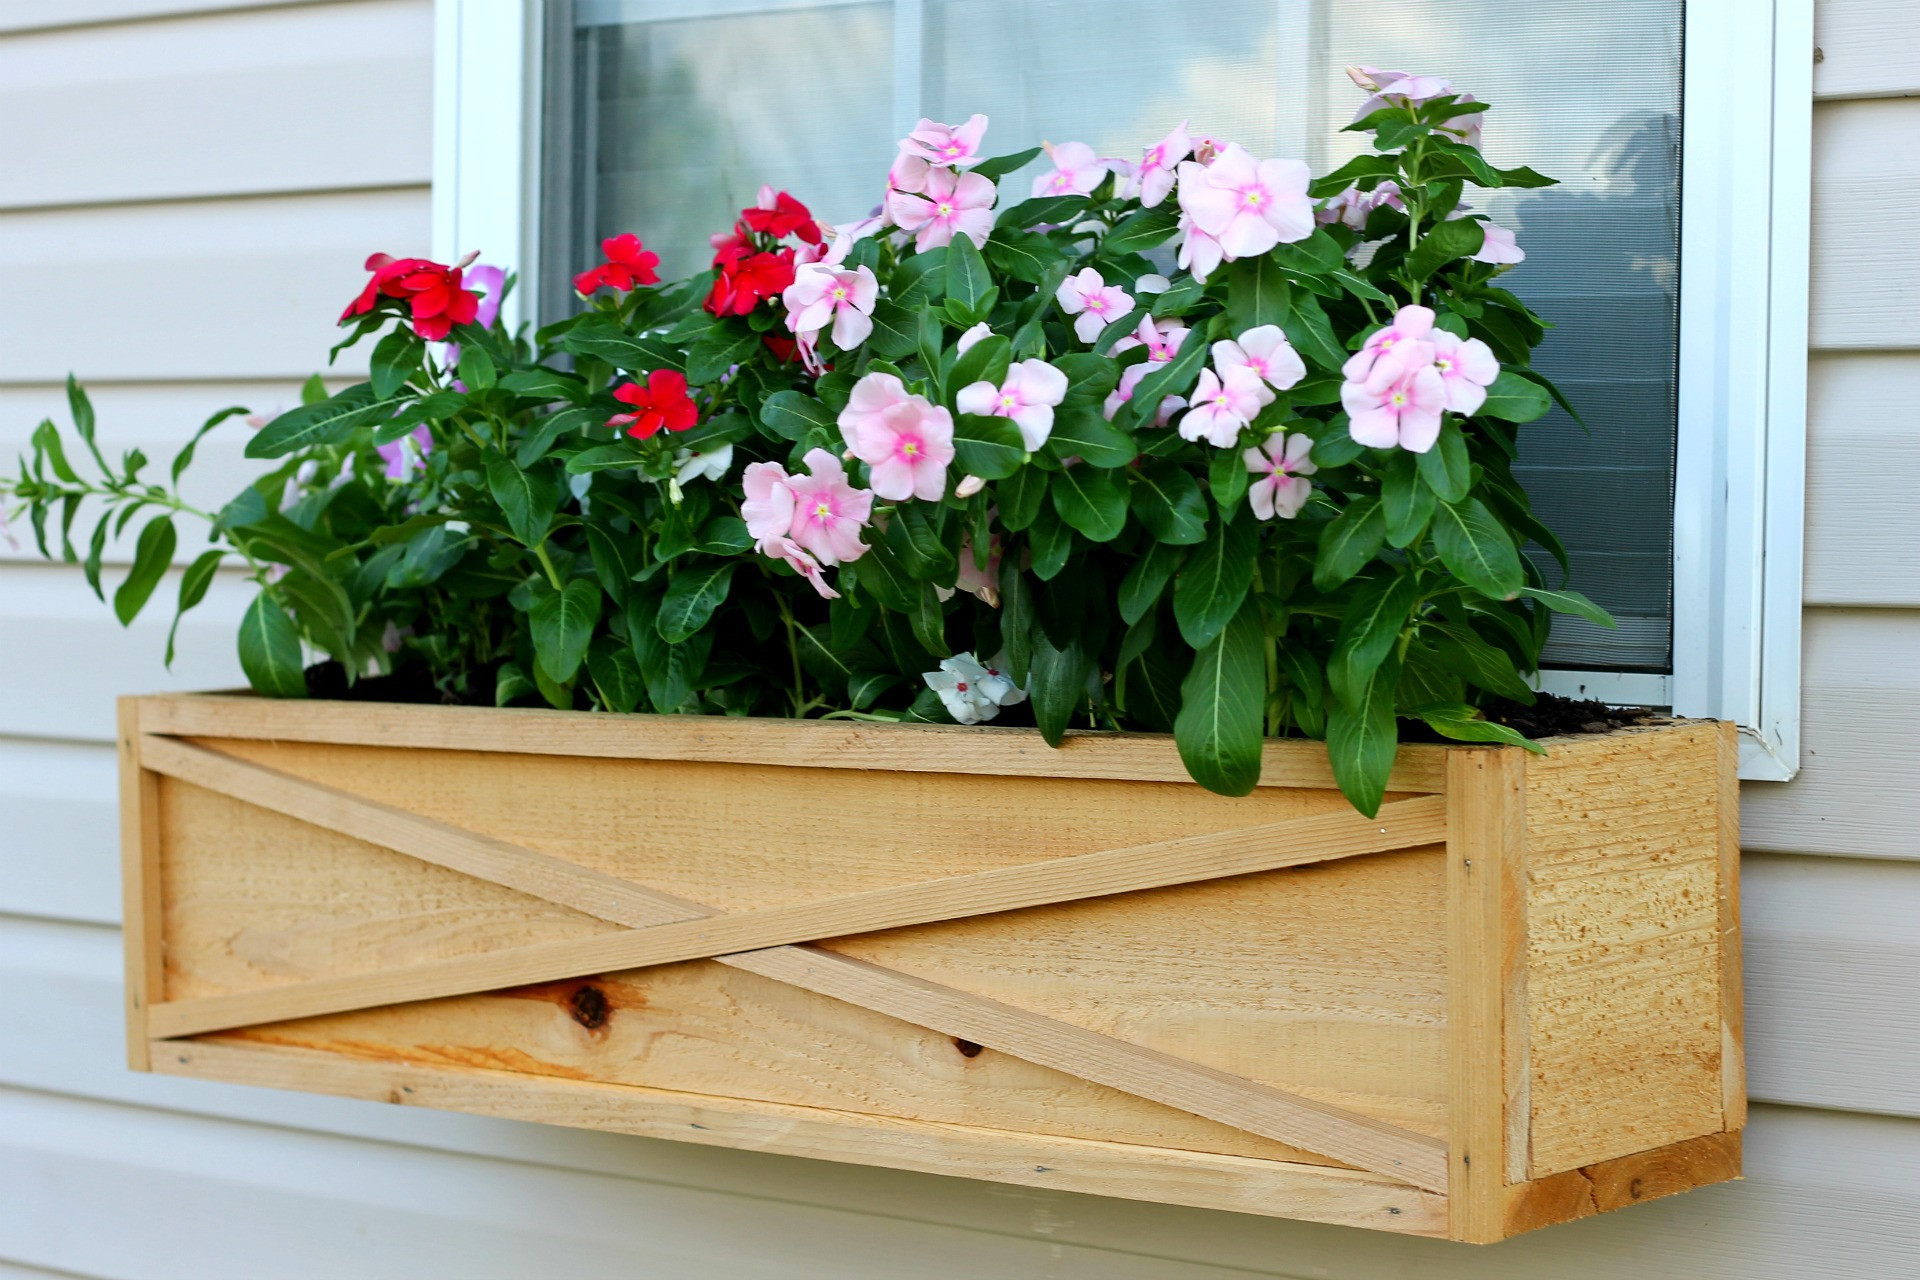 DIY Window Box Planters
 23 DIY Window Box Ideas Build And Fill Them With Colorful